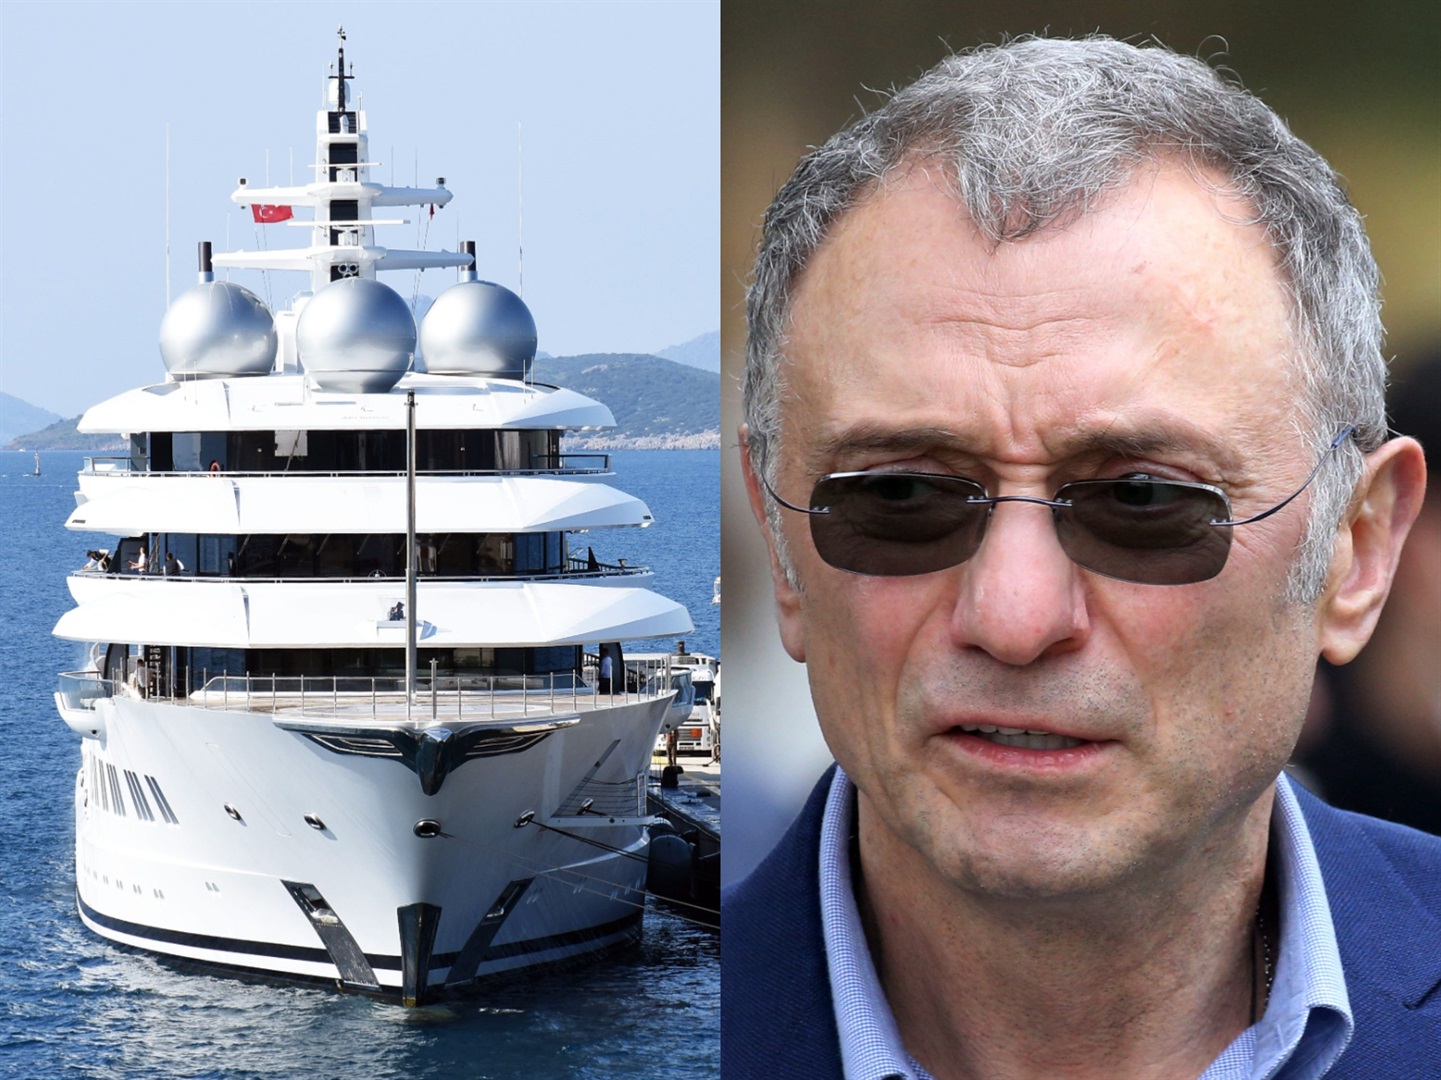 The US requested the seizure of Suleiman Kerimov's $325 million superyacht.